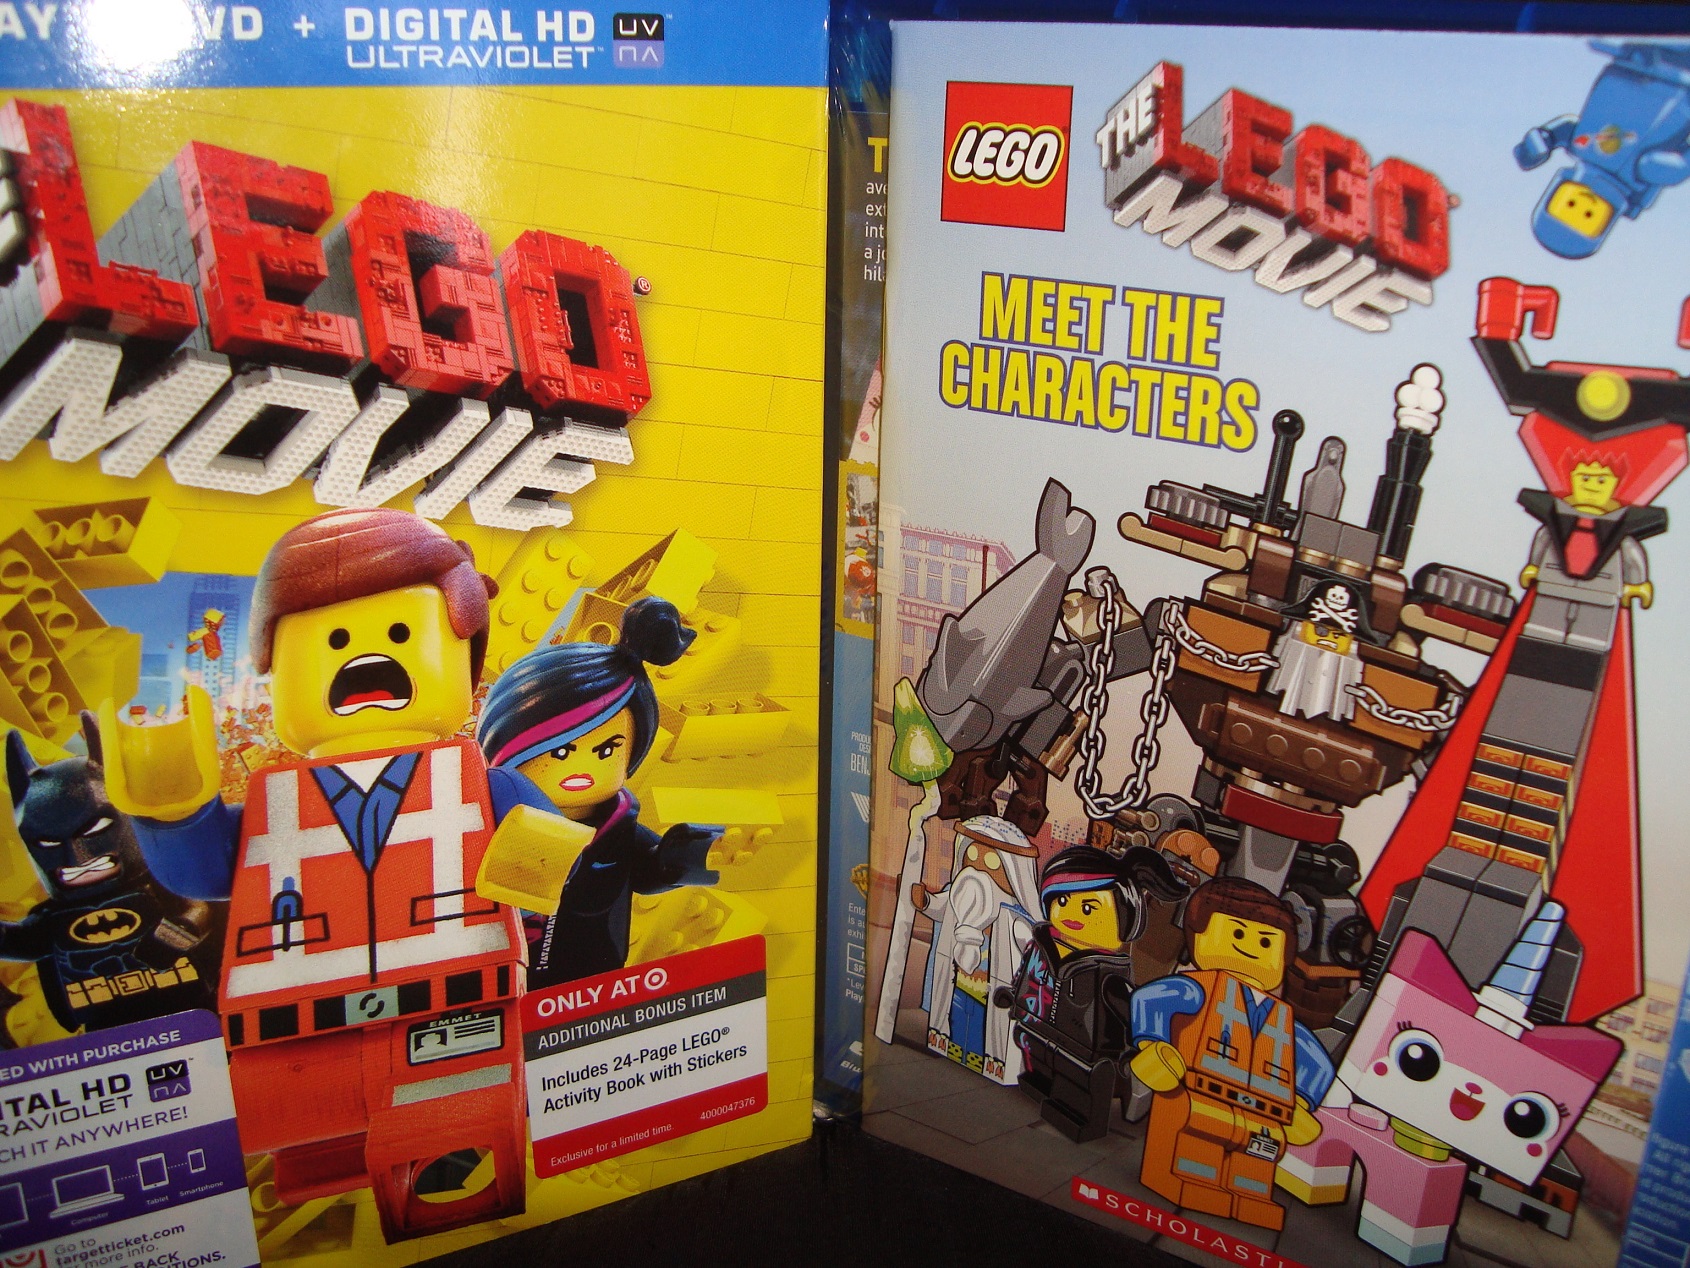 Lego Movie with Booklet